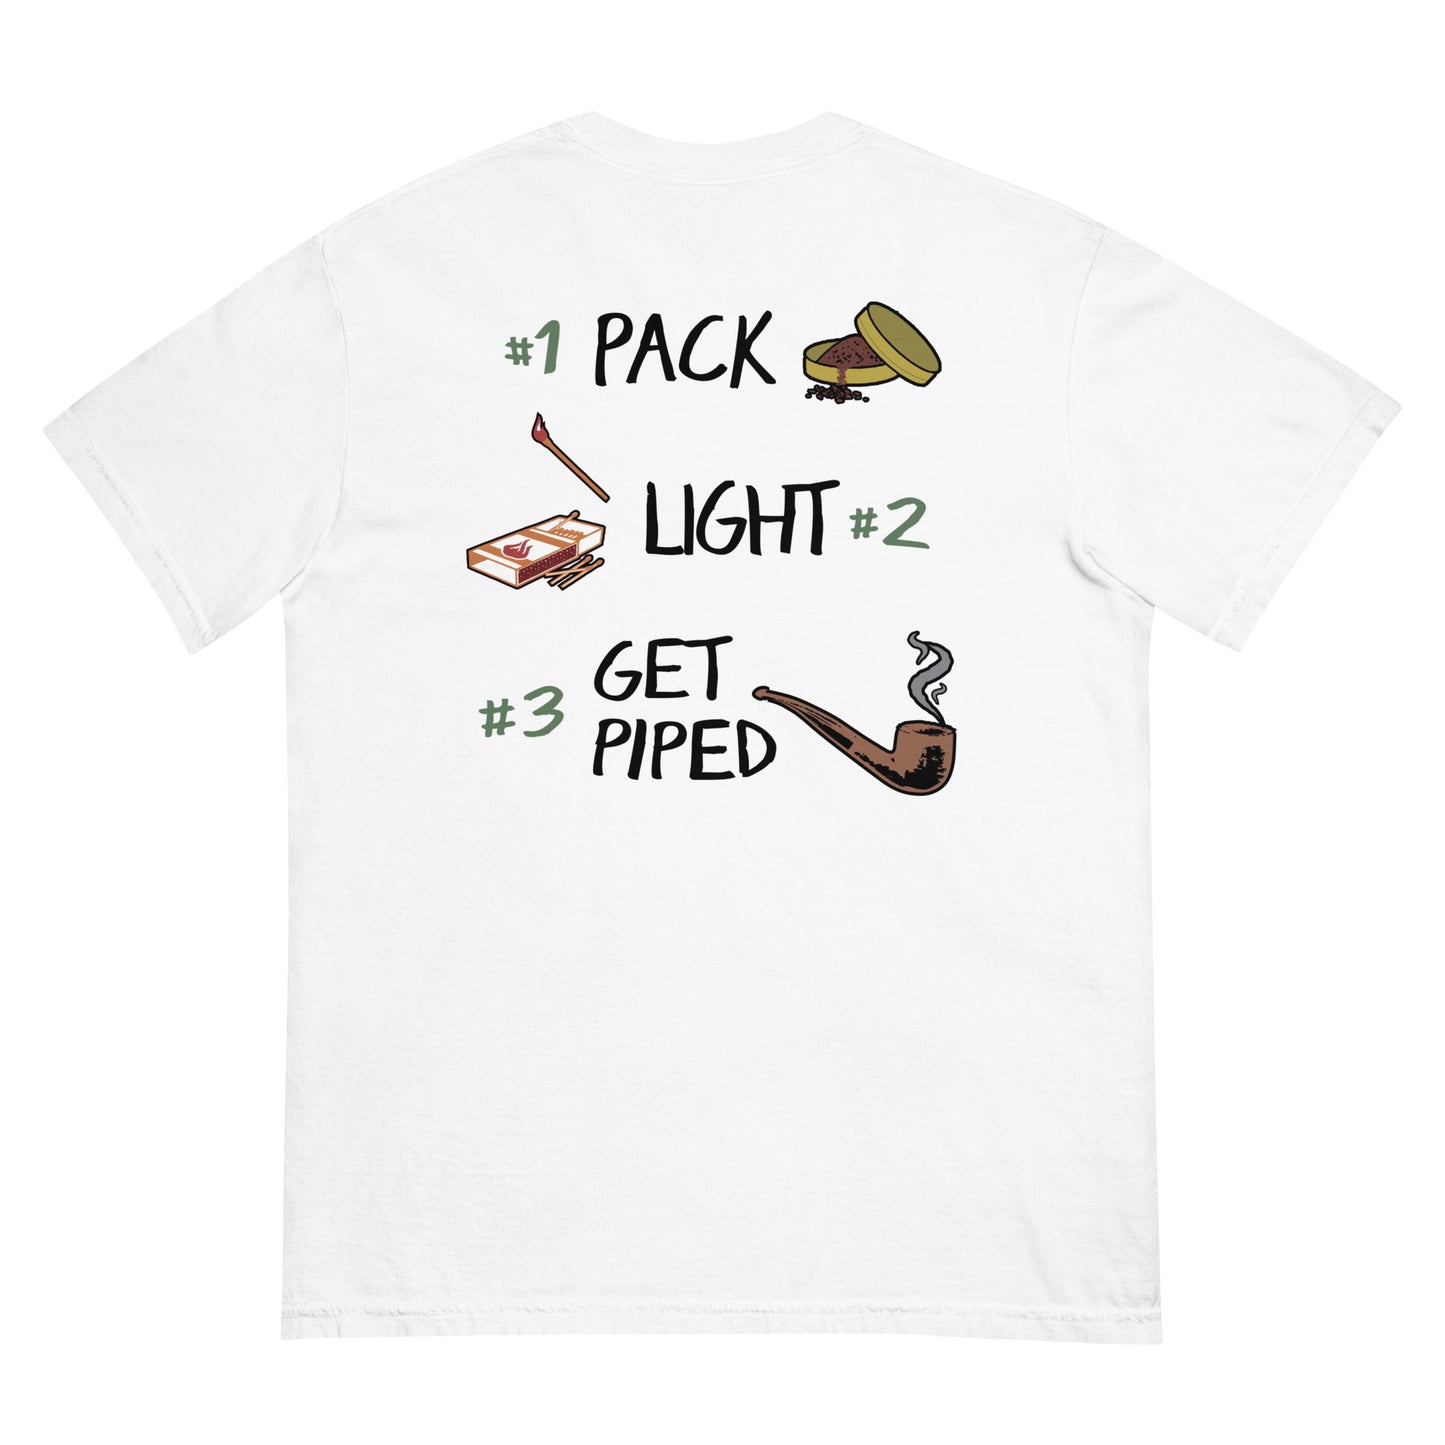 “Pack. Light. Get Piped.” Tee